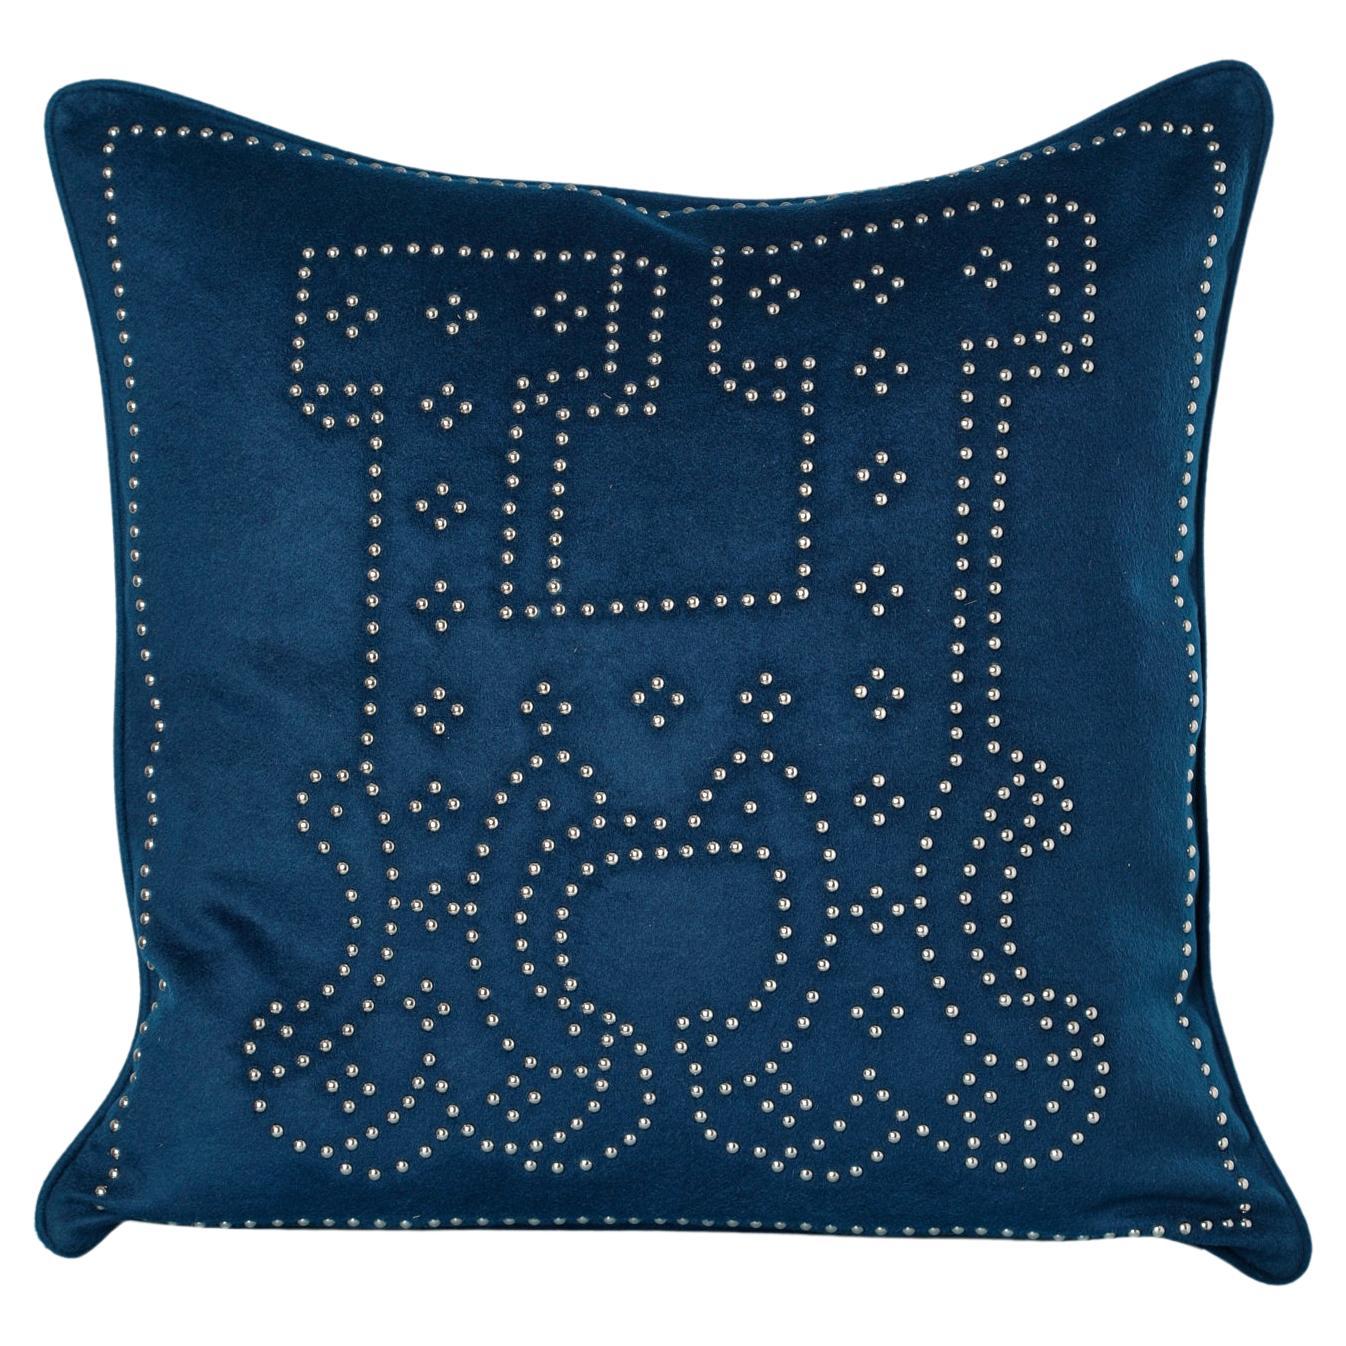 Night blue cashmere pillow case with "H" metallic studs. For Sale